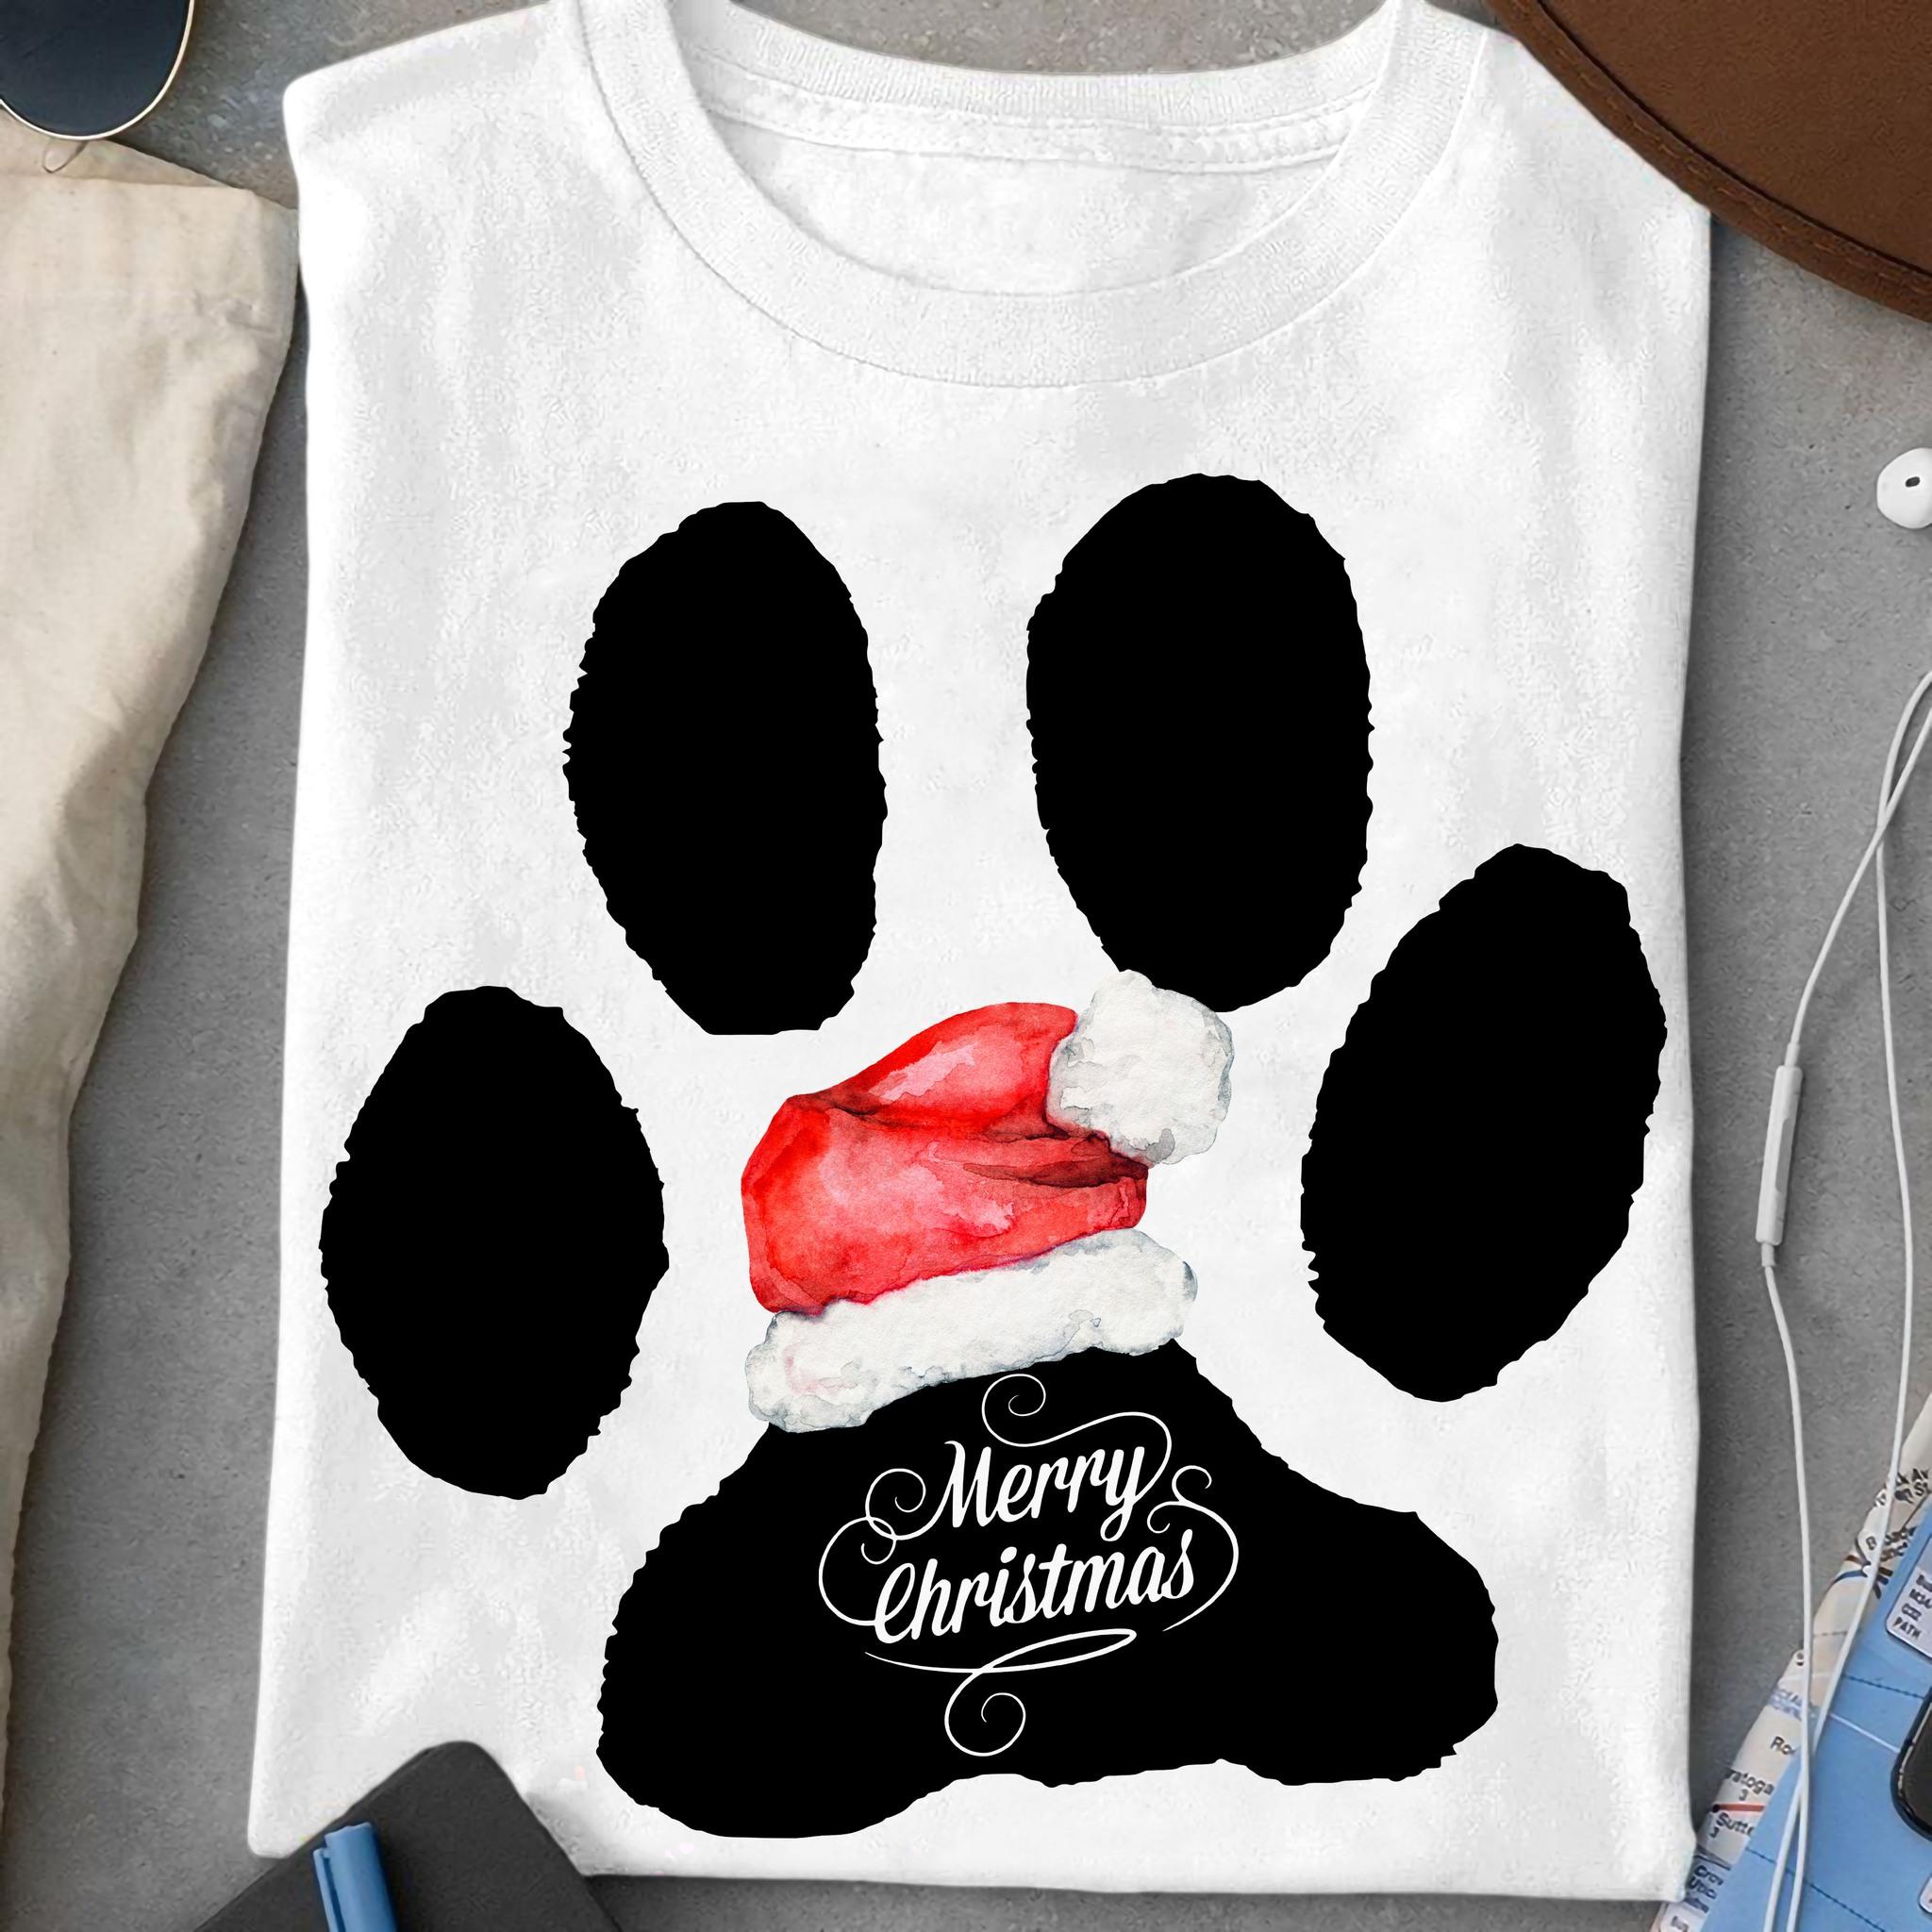 Merry Christmas - Santa Claus Dog paws, Christmas day ugly sweater